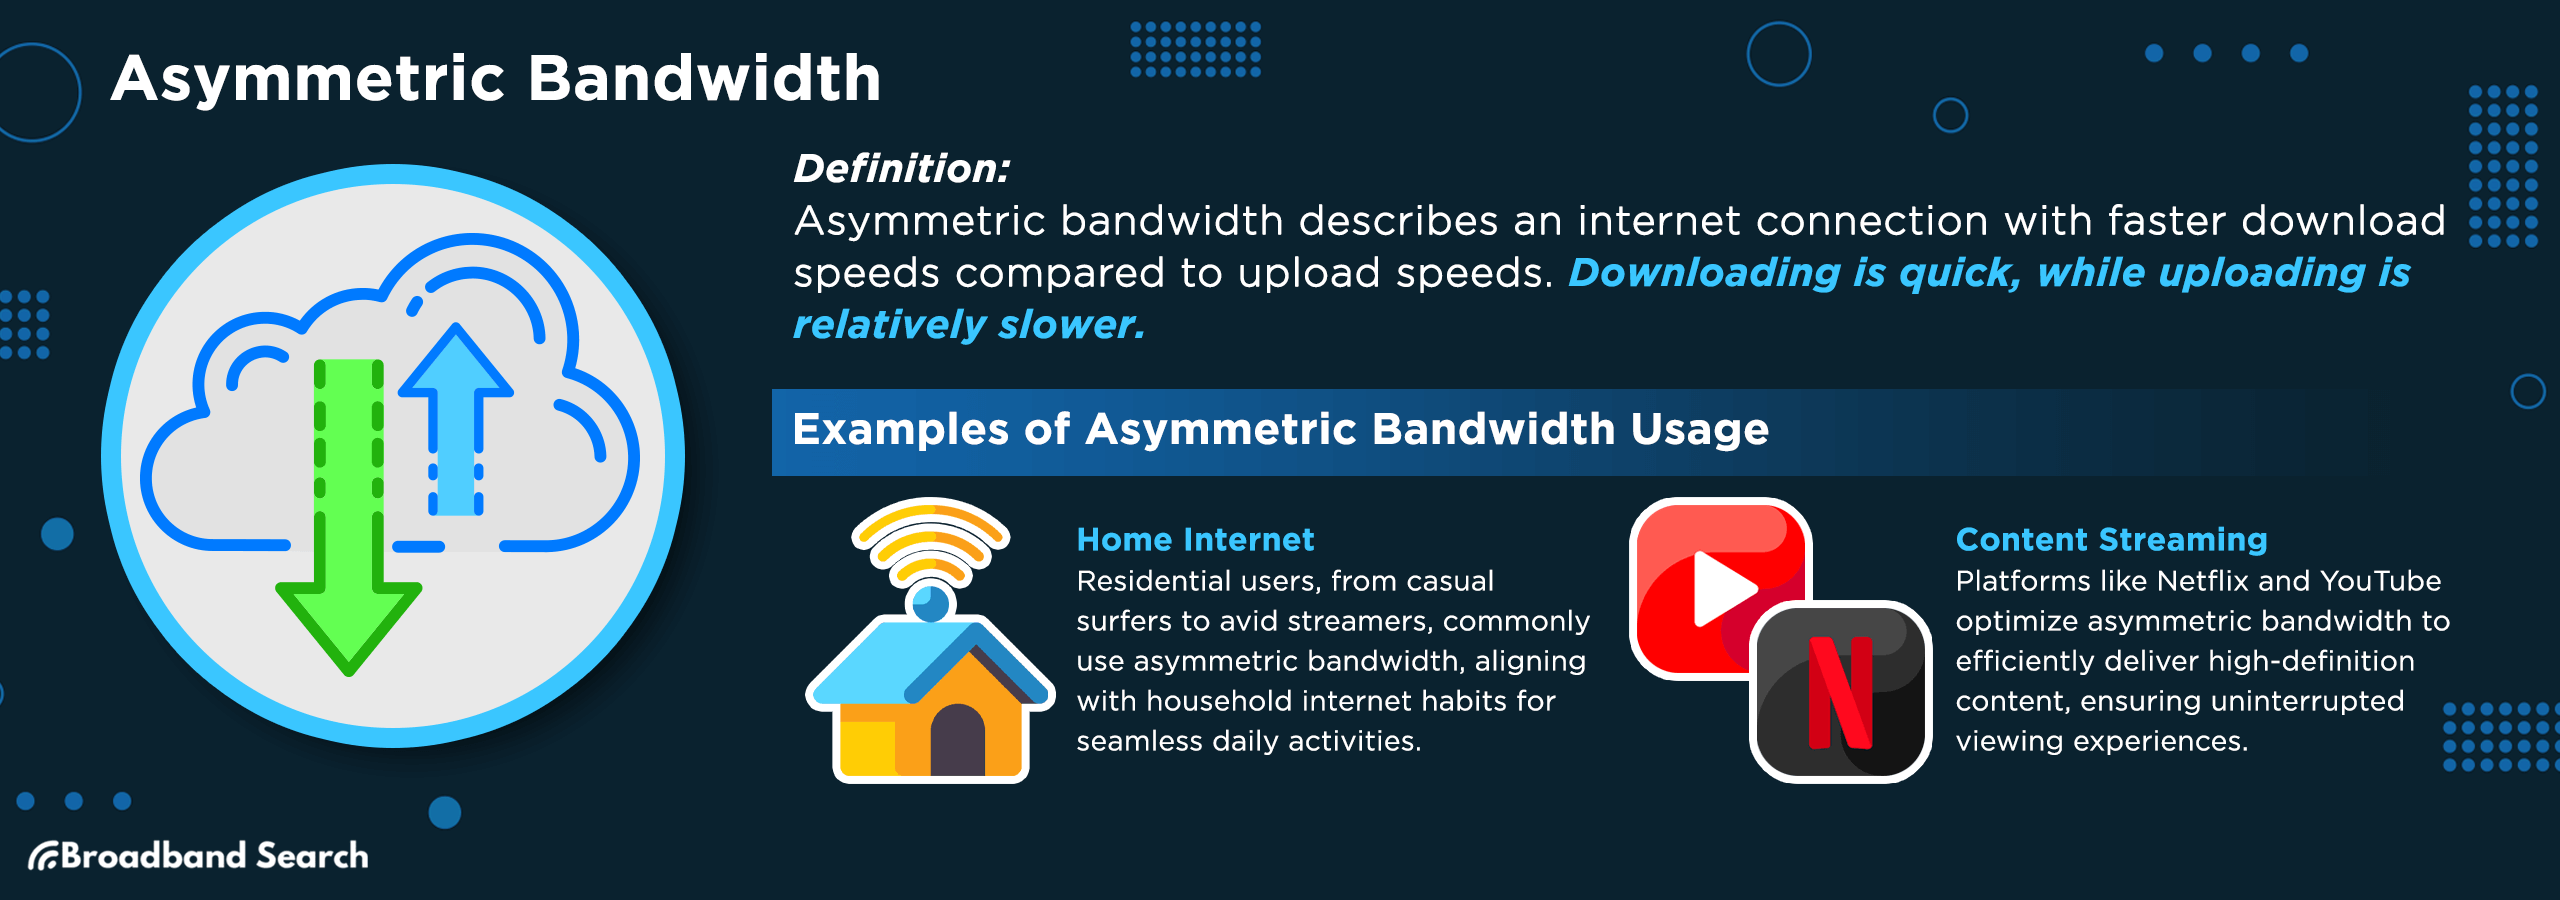 definition and examples of asymmetric bandwidth